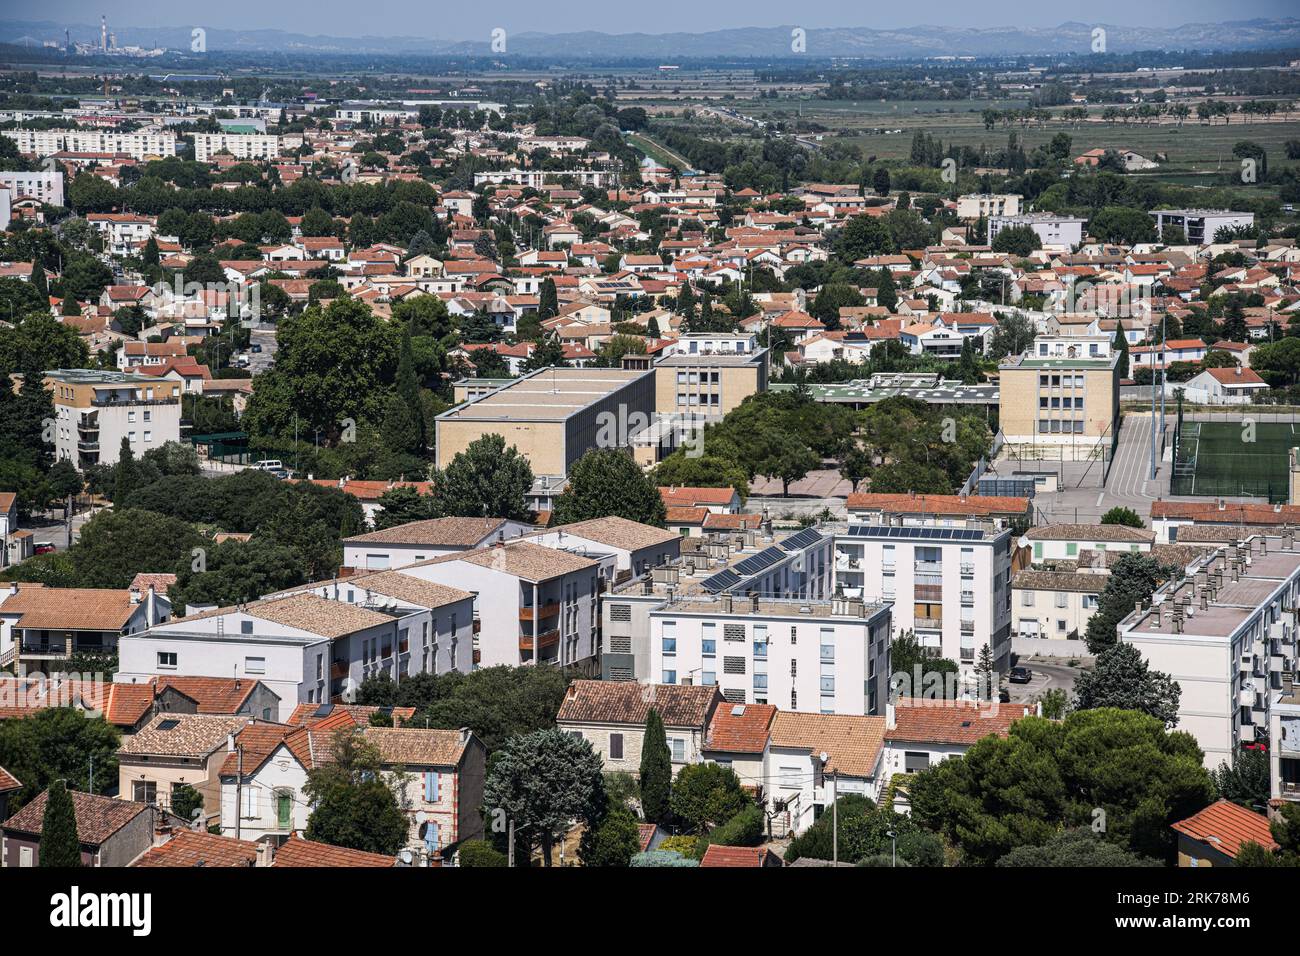 Landscape Photo Looking over the city of Arle from the Luma Tower. Stock Photo